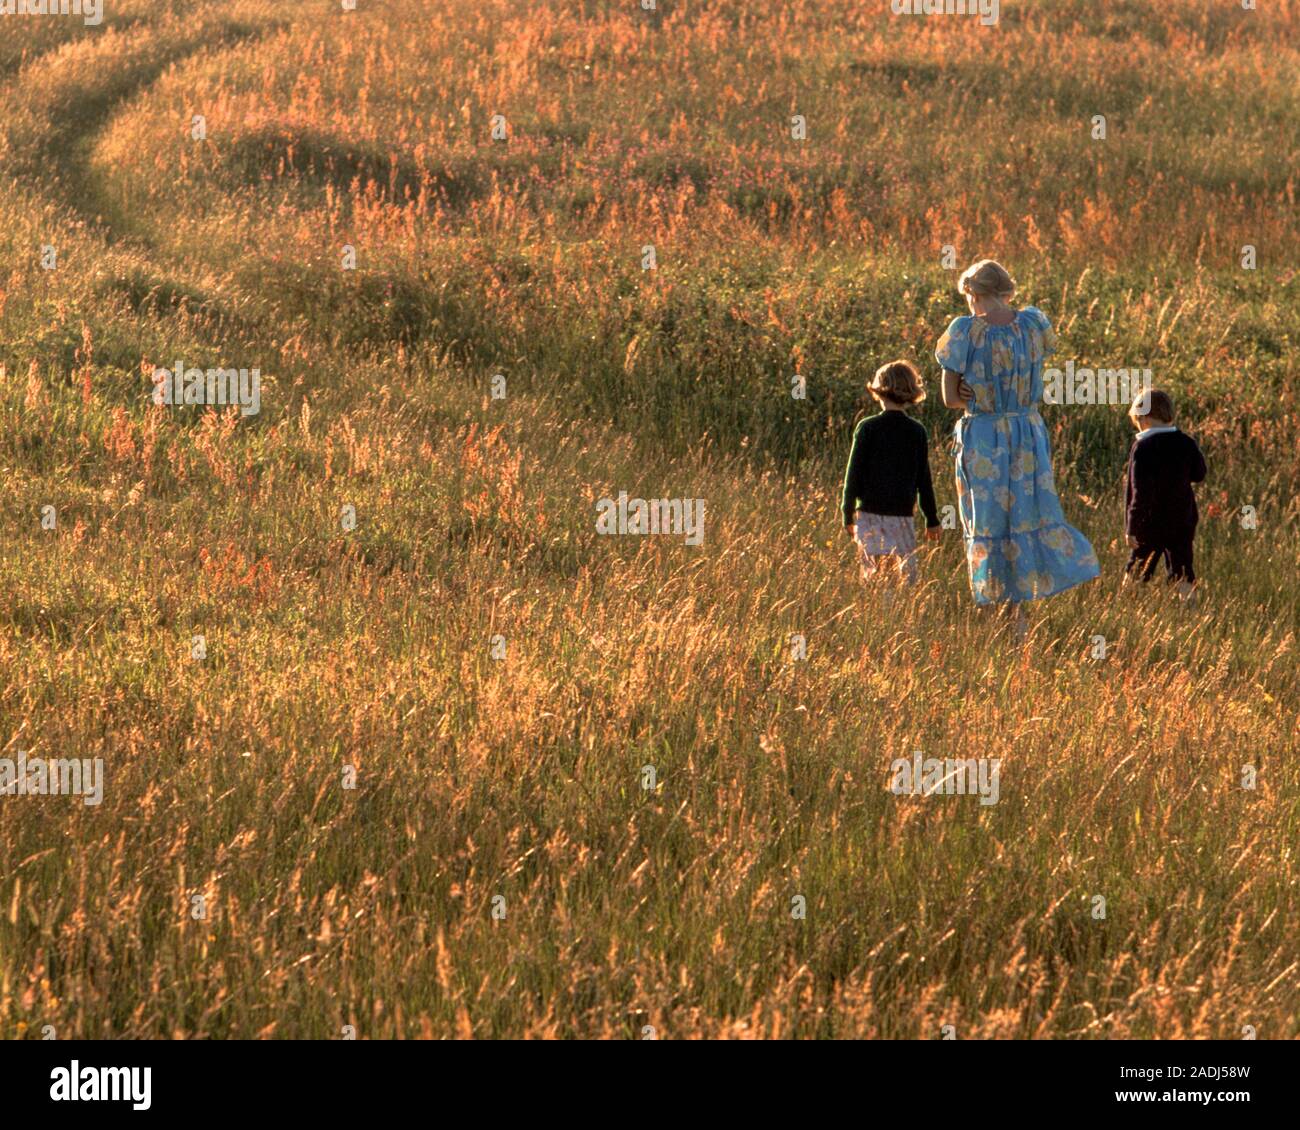 1980s ANONYMOUS SILHOUETTED WOMAN AND TWO CHILDREN BOY AND GIRL WALKING A PATH THROUGH A RURAL MEADOW IN SUMMER EVENING SUNLIGHT - kj8850 PHT001 HARS THROUGH JUVENILE BALANCE FAMILIES JOY LIFESTYLE CELEBRATION FEMALES BROTHERS RURAL HEALTHINESS NATURE COPY SPACE FULL-LENGTH MALES SUNLIGHT WARM SERENITY SIBLINGS SPIRITUALITY SISTERS MEADOW SADNESS SUMMERTIME WIDE ANGLE DREAMS PATH HAPPINESS WELLNESS ADVENTURE LEISURE STRENGTH PASTURE SILHOUETTED AND CHOICE POWERFUL RECREATION DIRECTION A IN SIBLING CONNECTION CONCEPTUAL STYLISH SUNLIT SUPPORT ANONYMOUS PASTORAL HILLSIDE JUVENILES MID-ADULT Stock Photo